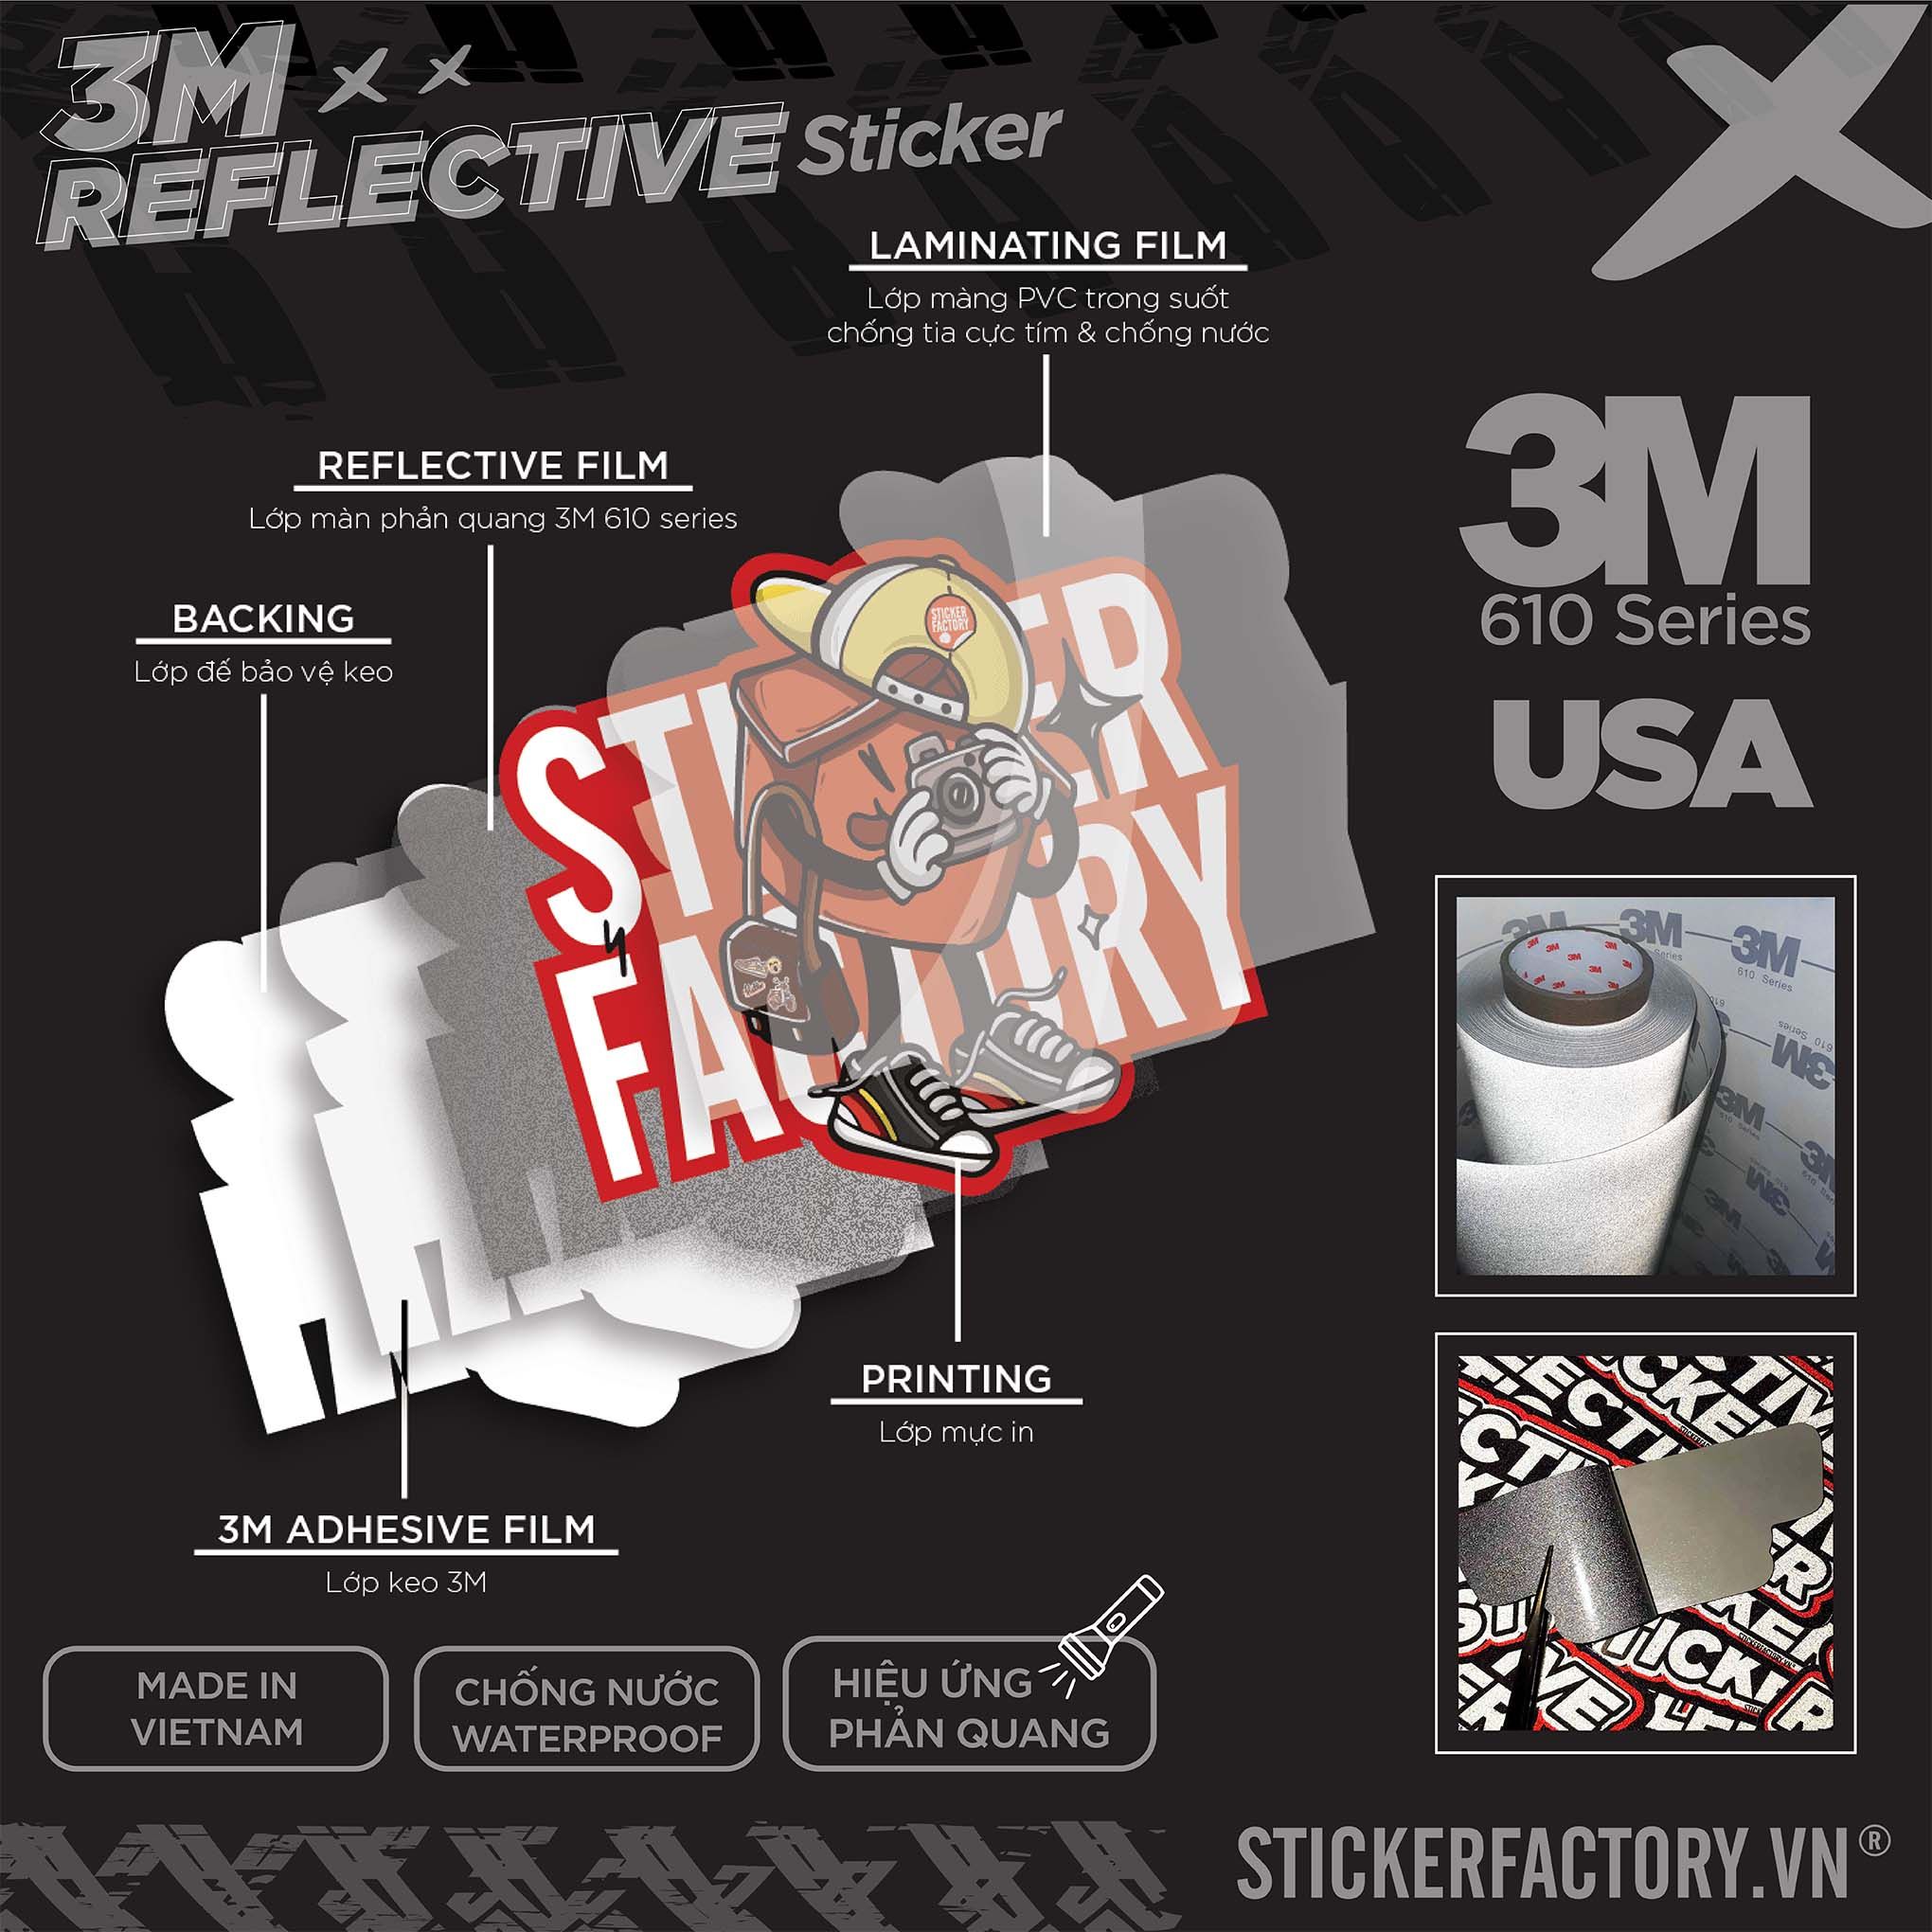 GIVE ME MORE SPACE 3M - Reflective Sticker Die-cut